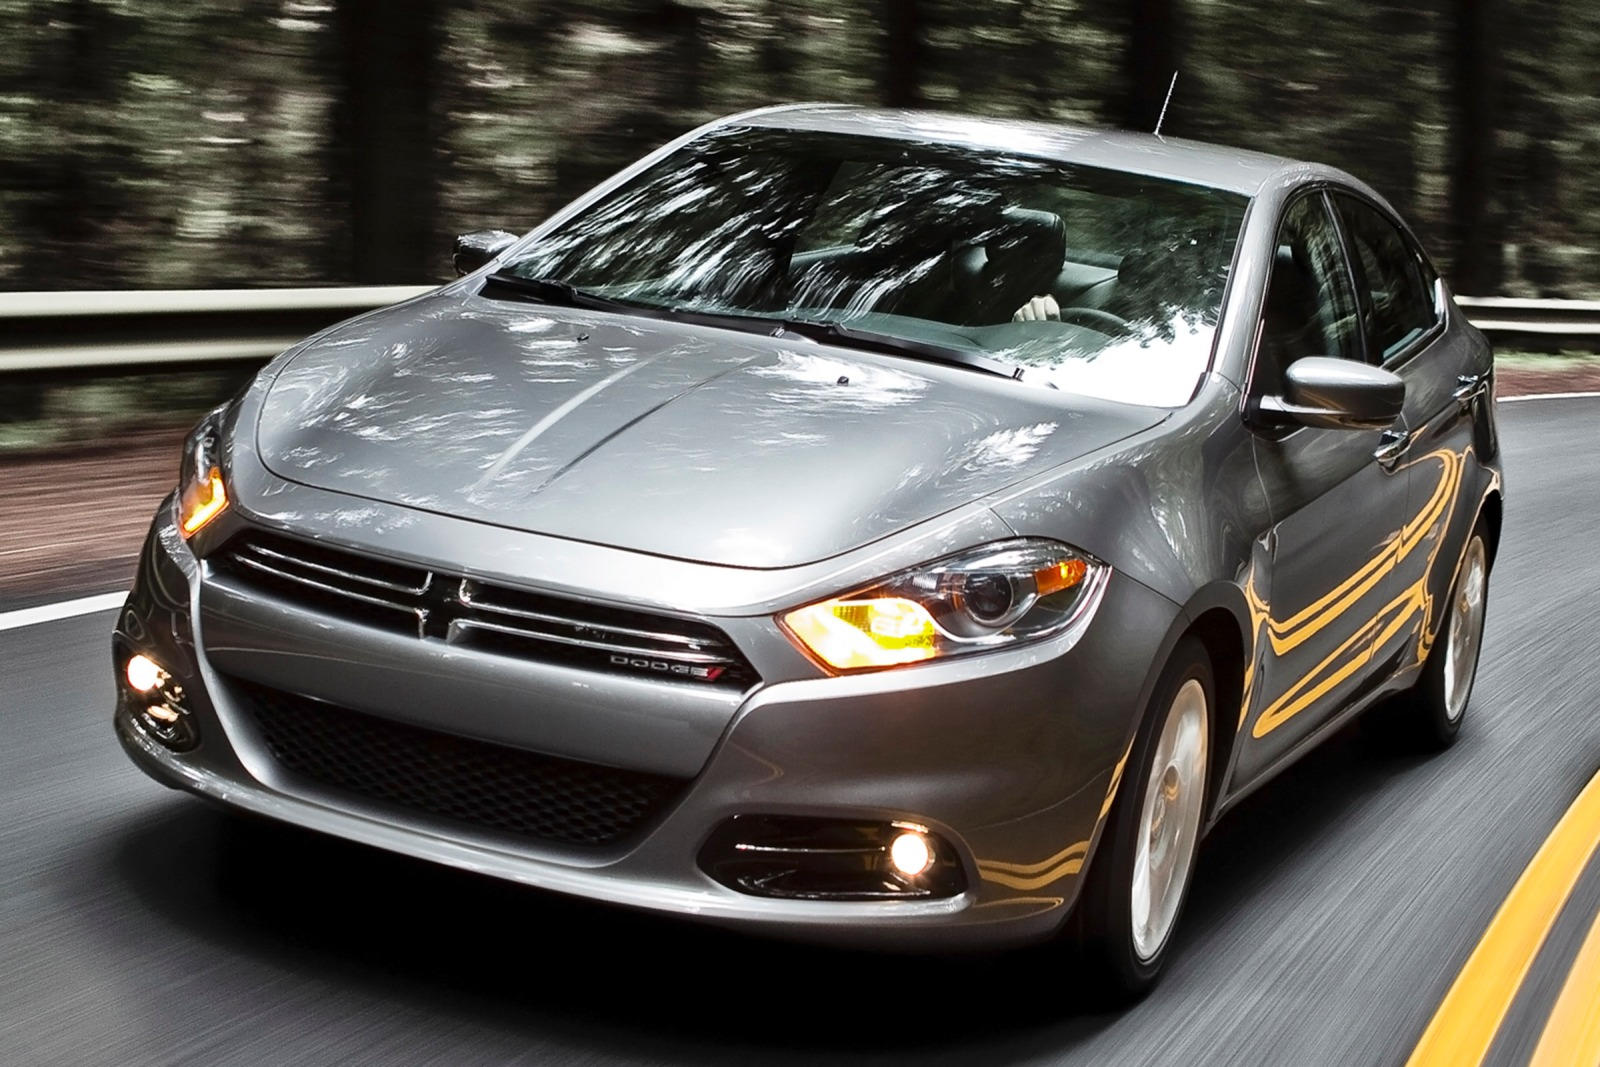 2016 Dodge Dart Front View Driving